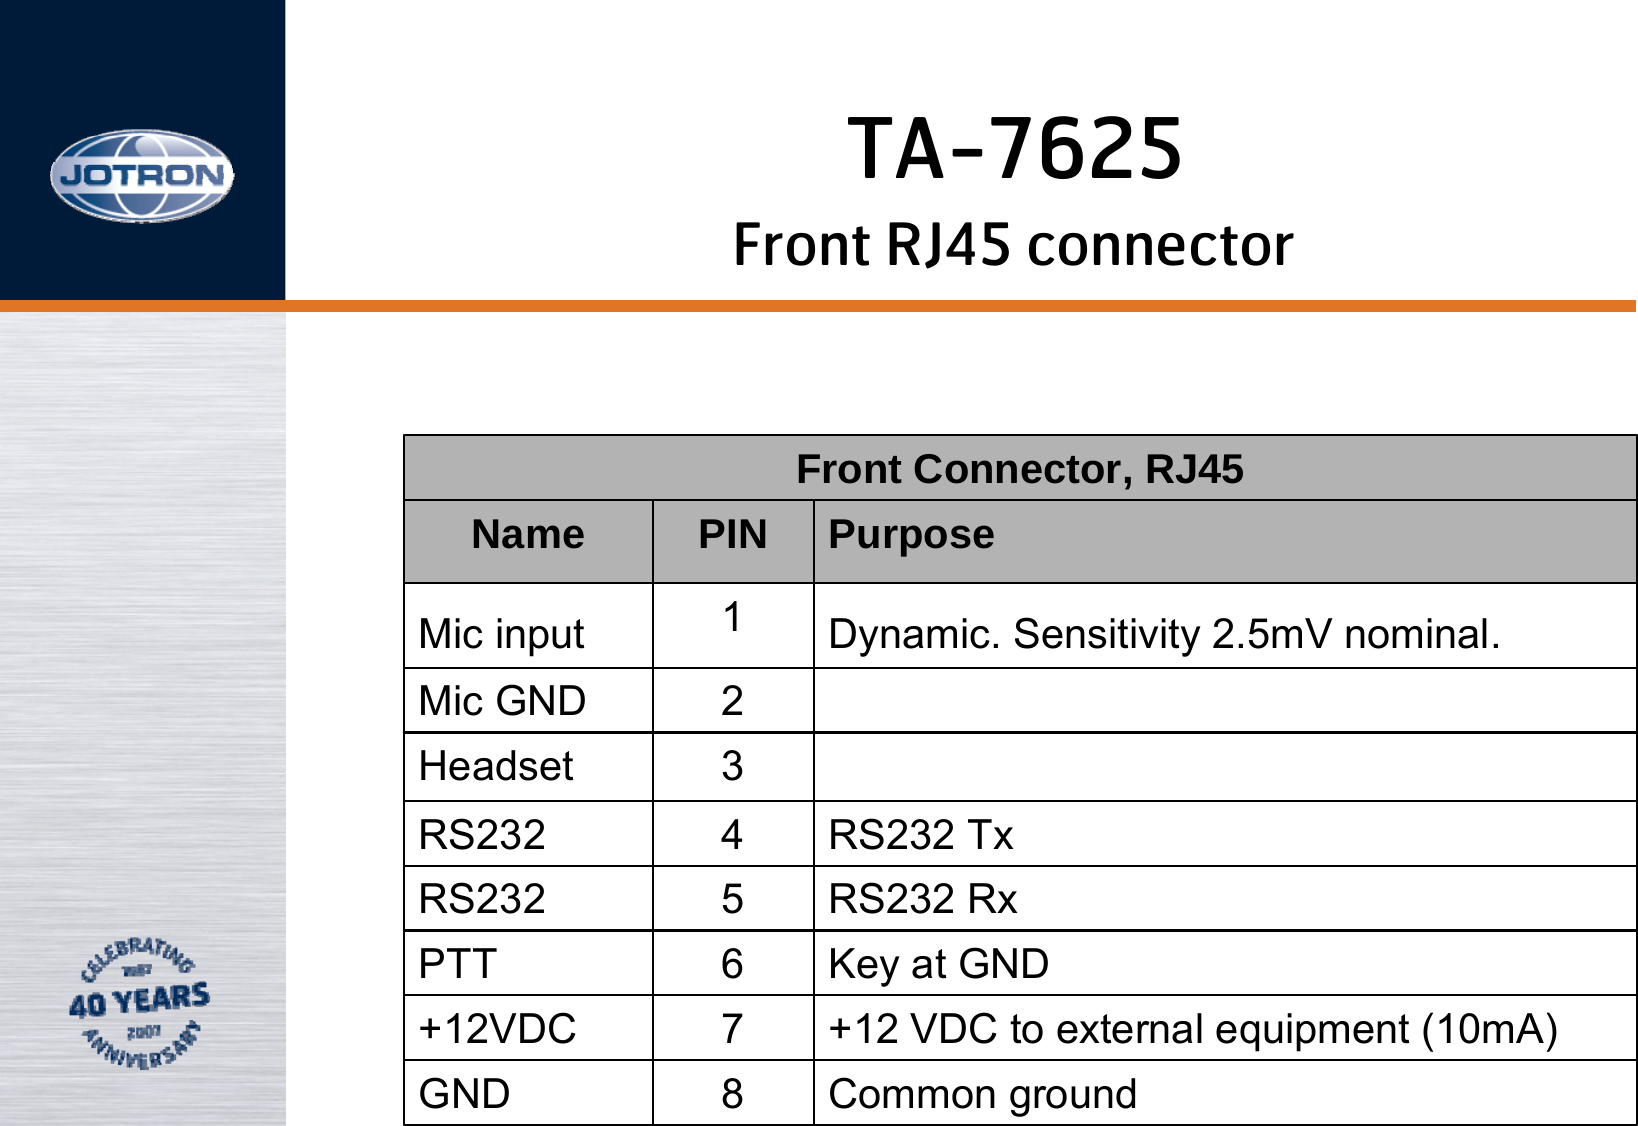 Front RJ45 connectorFront Connector, RJ45Name PIN PurposeMic input 1Dynamic. Sensitivity 2.5mV nominal.Mic GND 2Headset 3RS232 4RS232 TxRS232 5RS232 RxPTT 6Key at GND+12VDC 7+12 VDC to external equipment (10mA)GND 8Common ground TA-7625